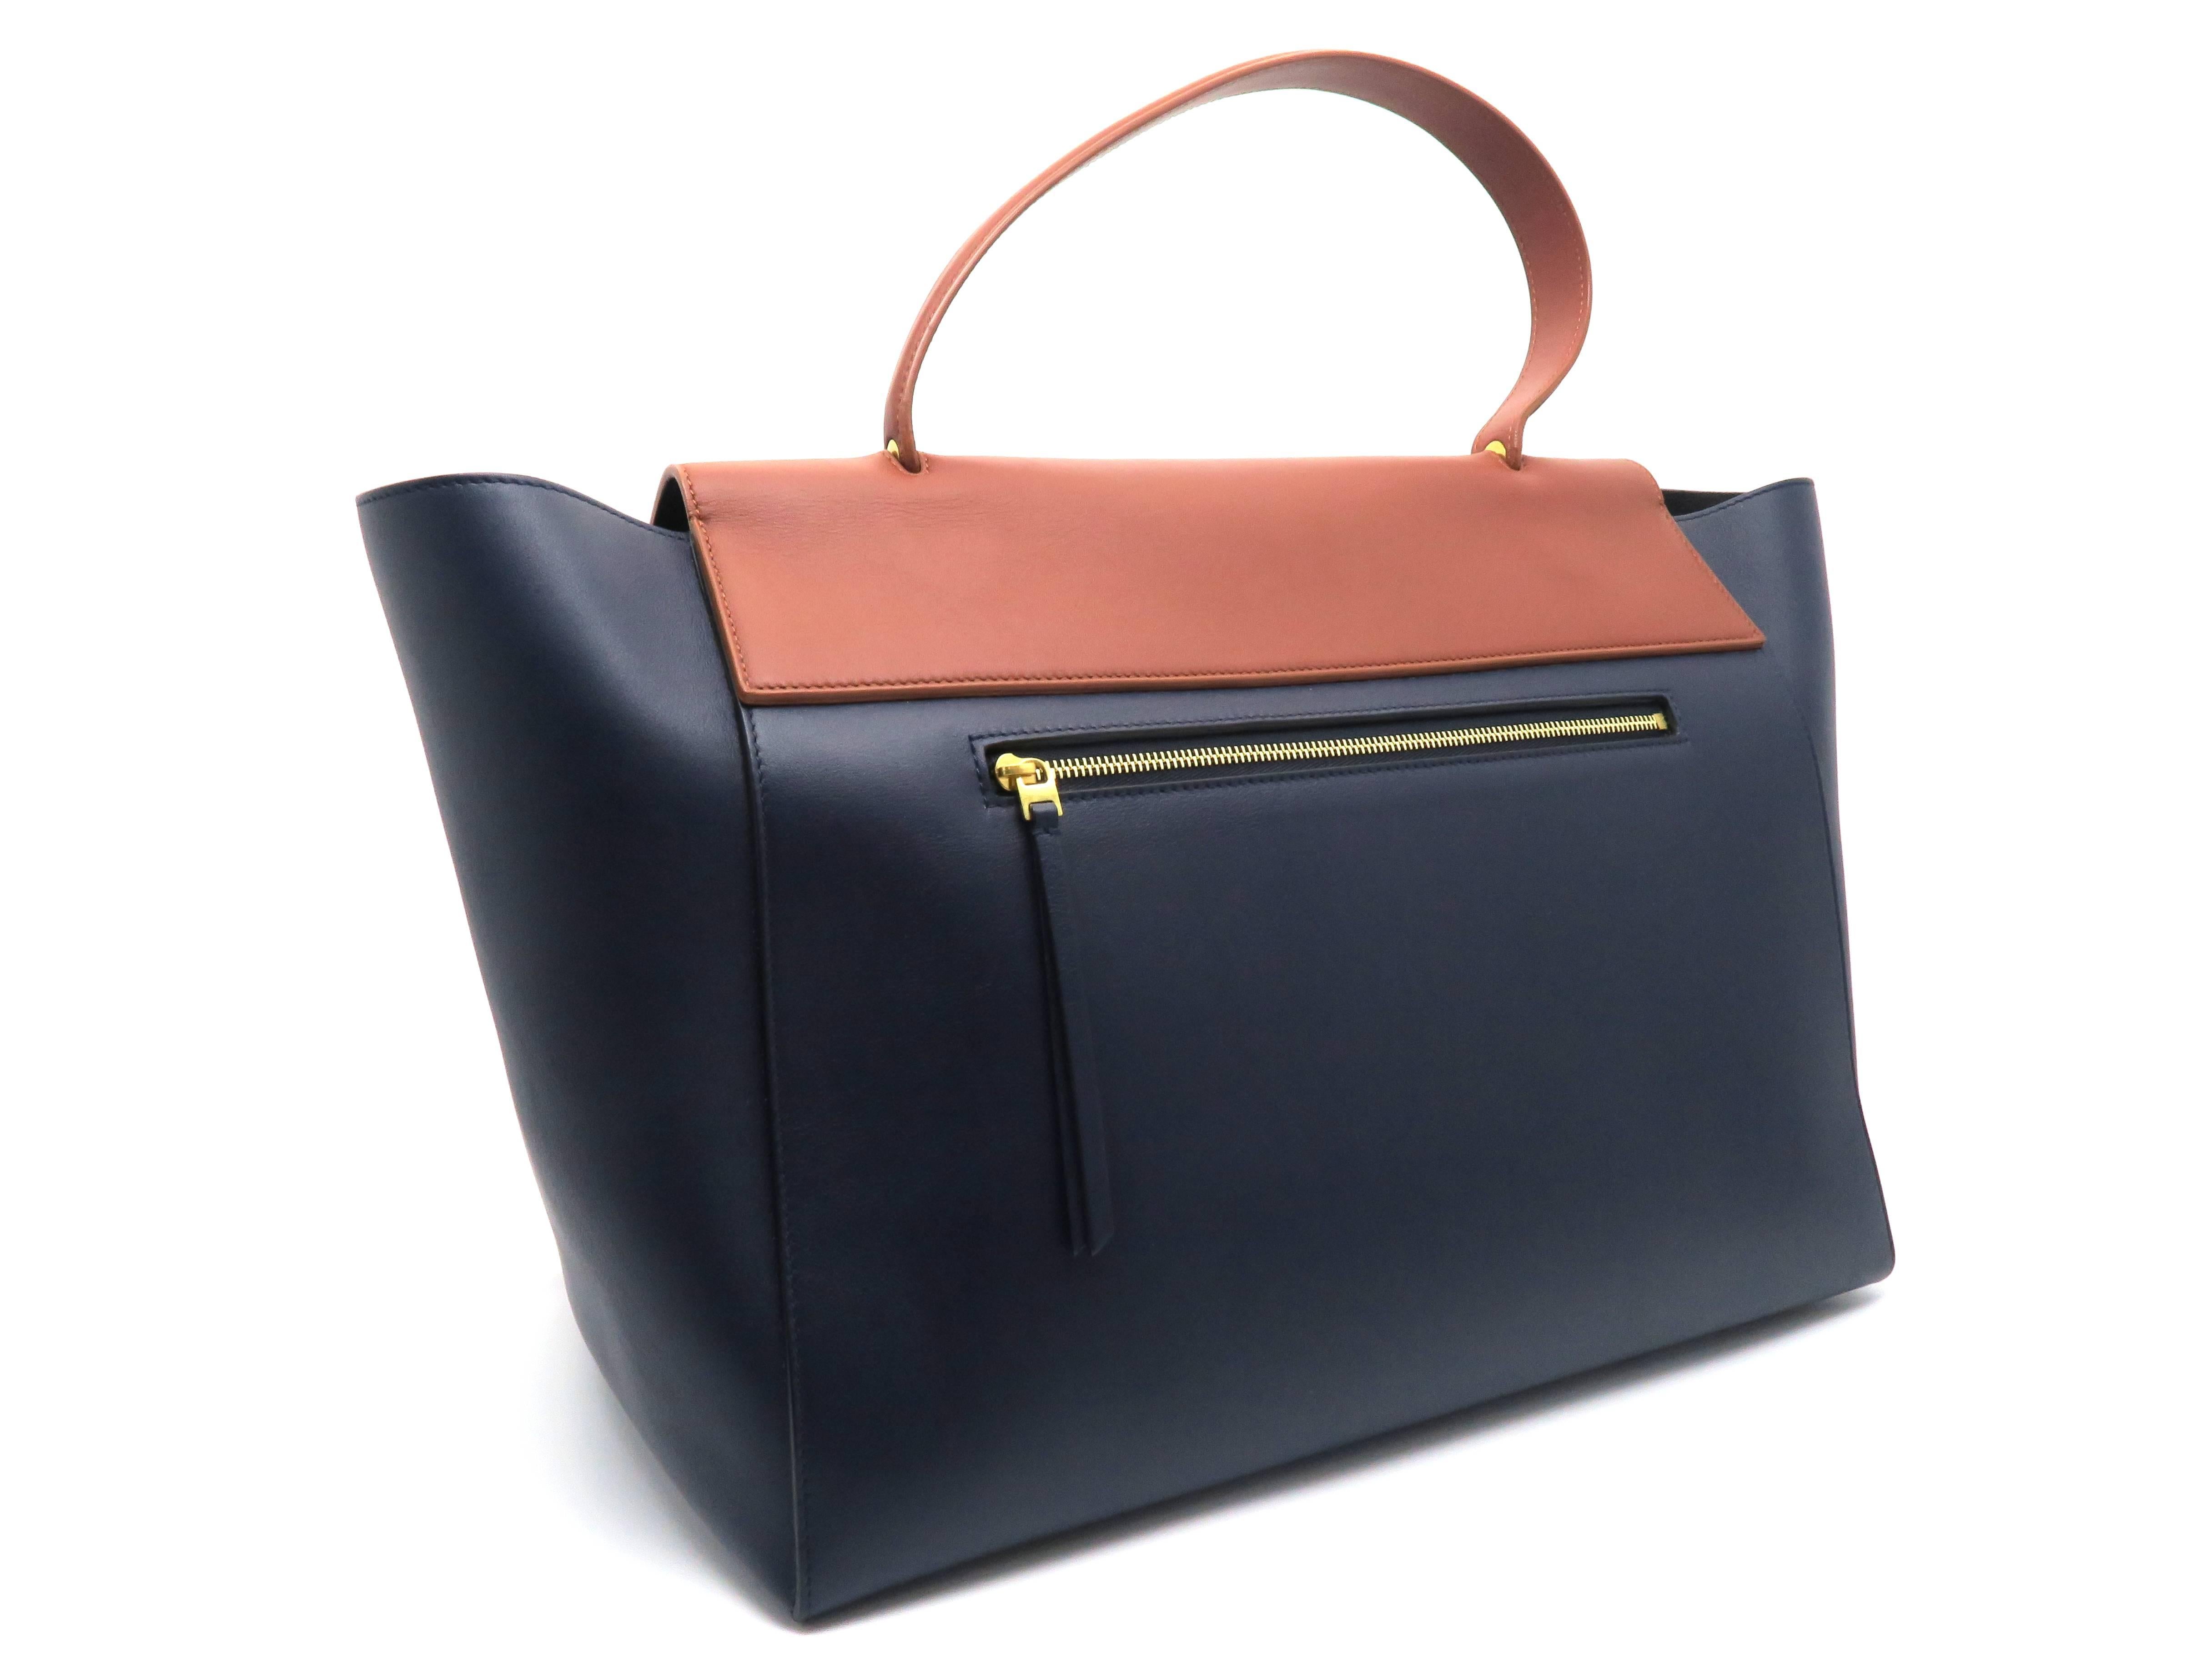 Color: Blue/ Brown

Material: Calfskin Leather

Condition: Rank S
Overall: Almost New
Surface: Good
Corners: Good
Edges: Good
Handles/Straps: Good
Hardware: Good

Dimension: W35 × H25 × D21.5cm（W13.7" × H9.8" ×